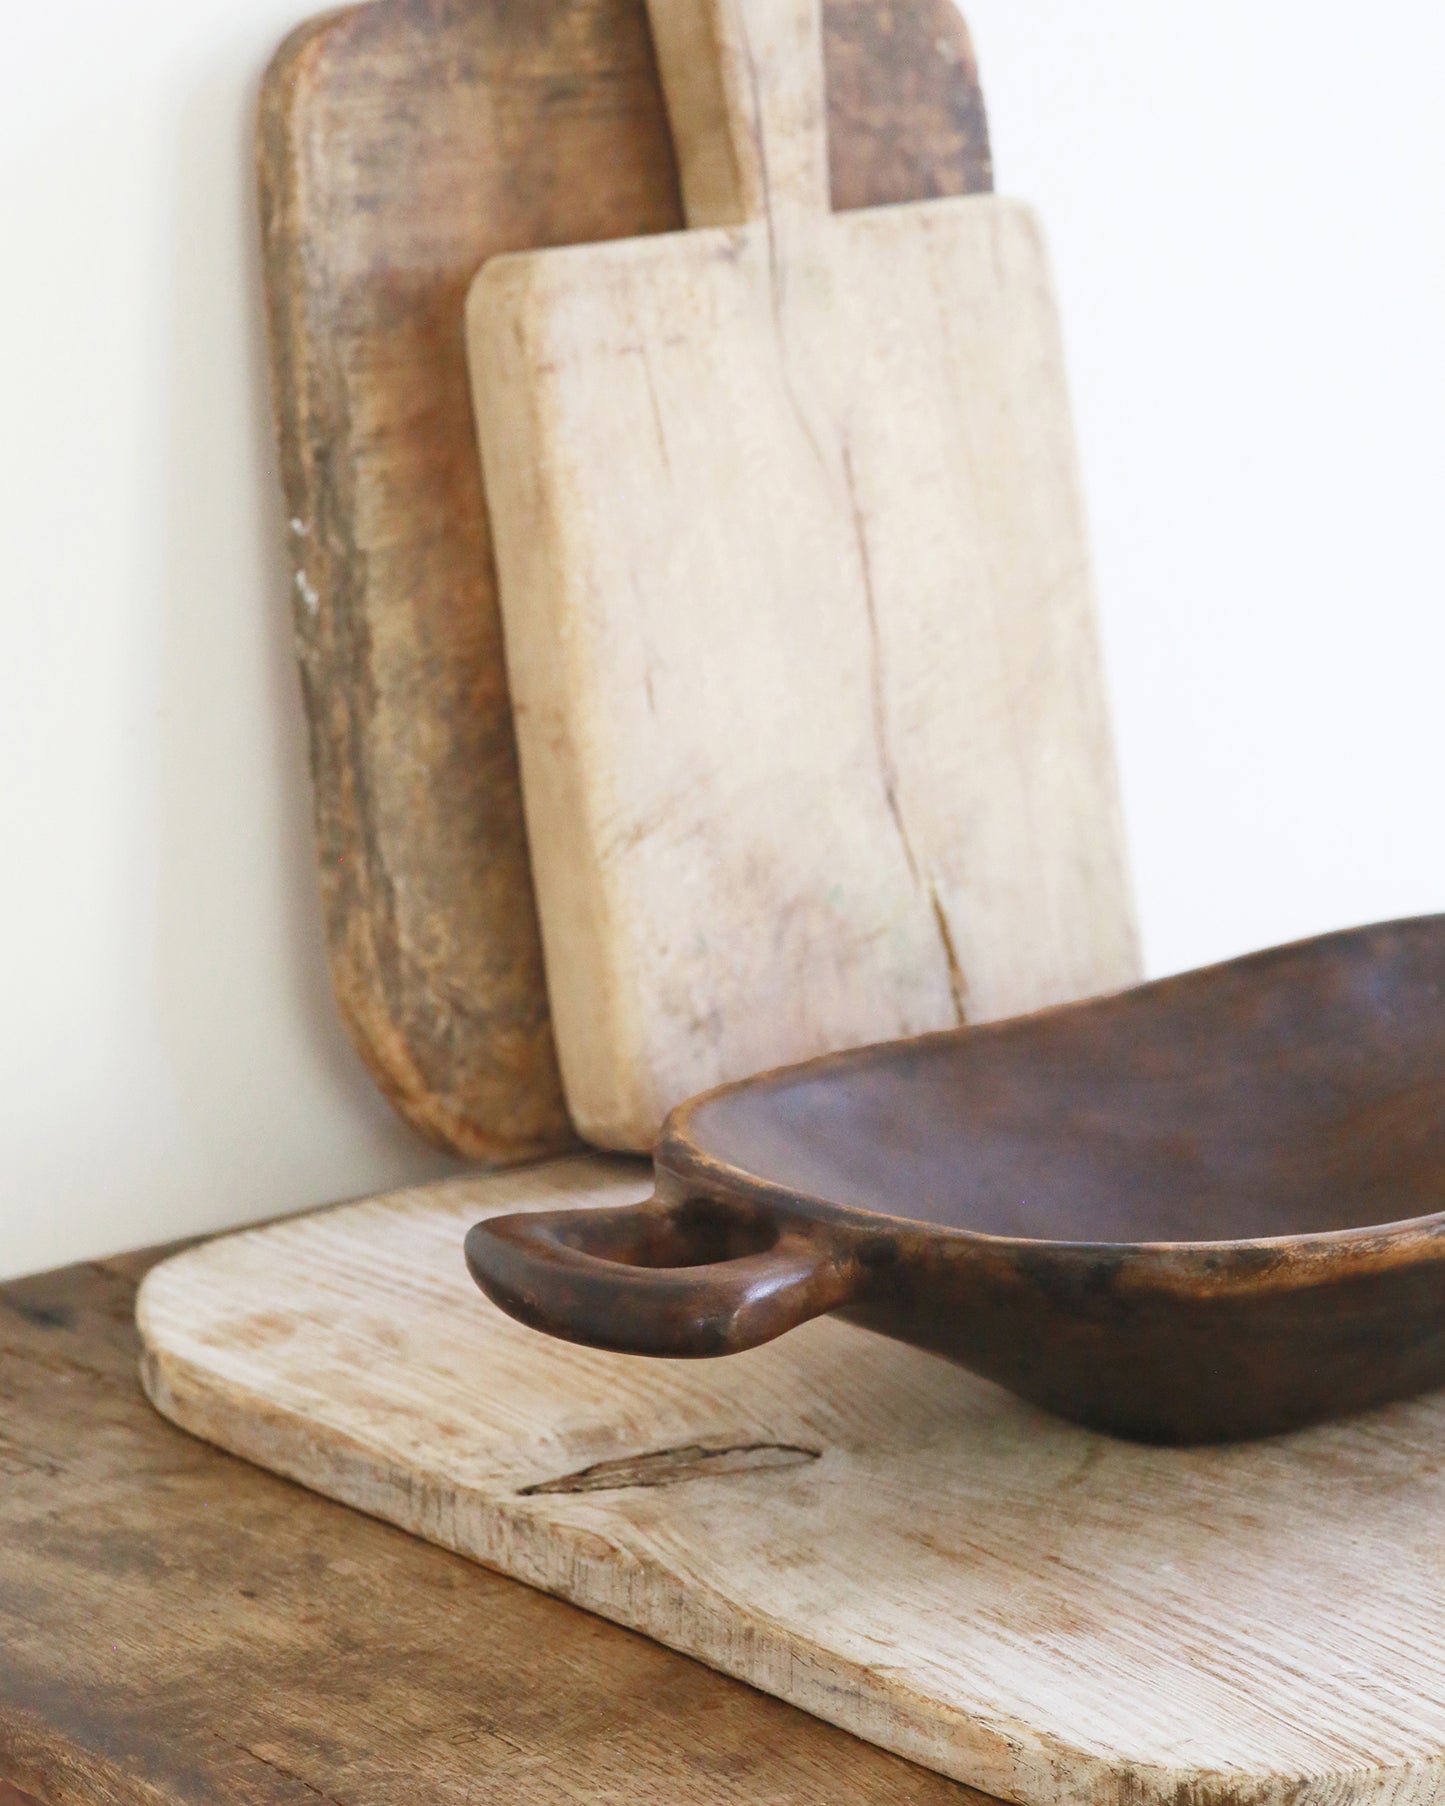 Handle detail on rustic wooden serving bowl with kitchen styling